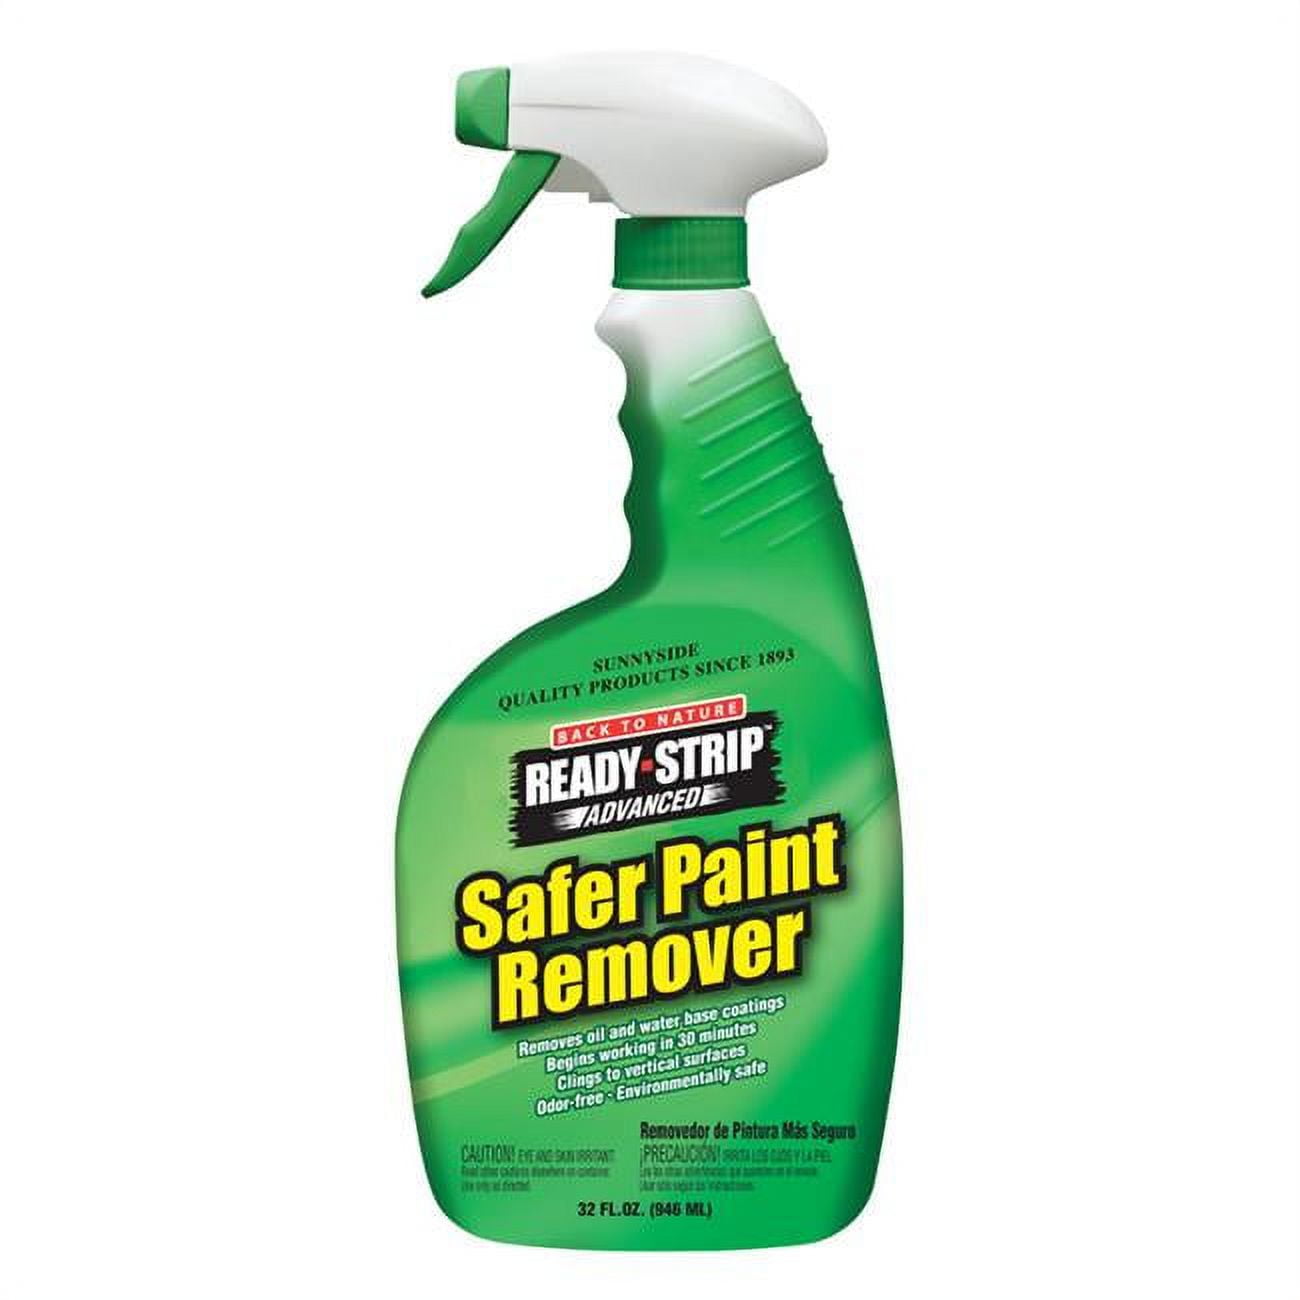 Get Off Clean Road Paint Remover